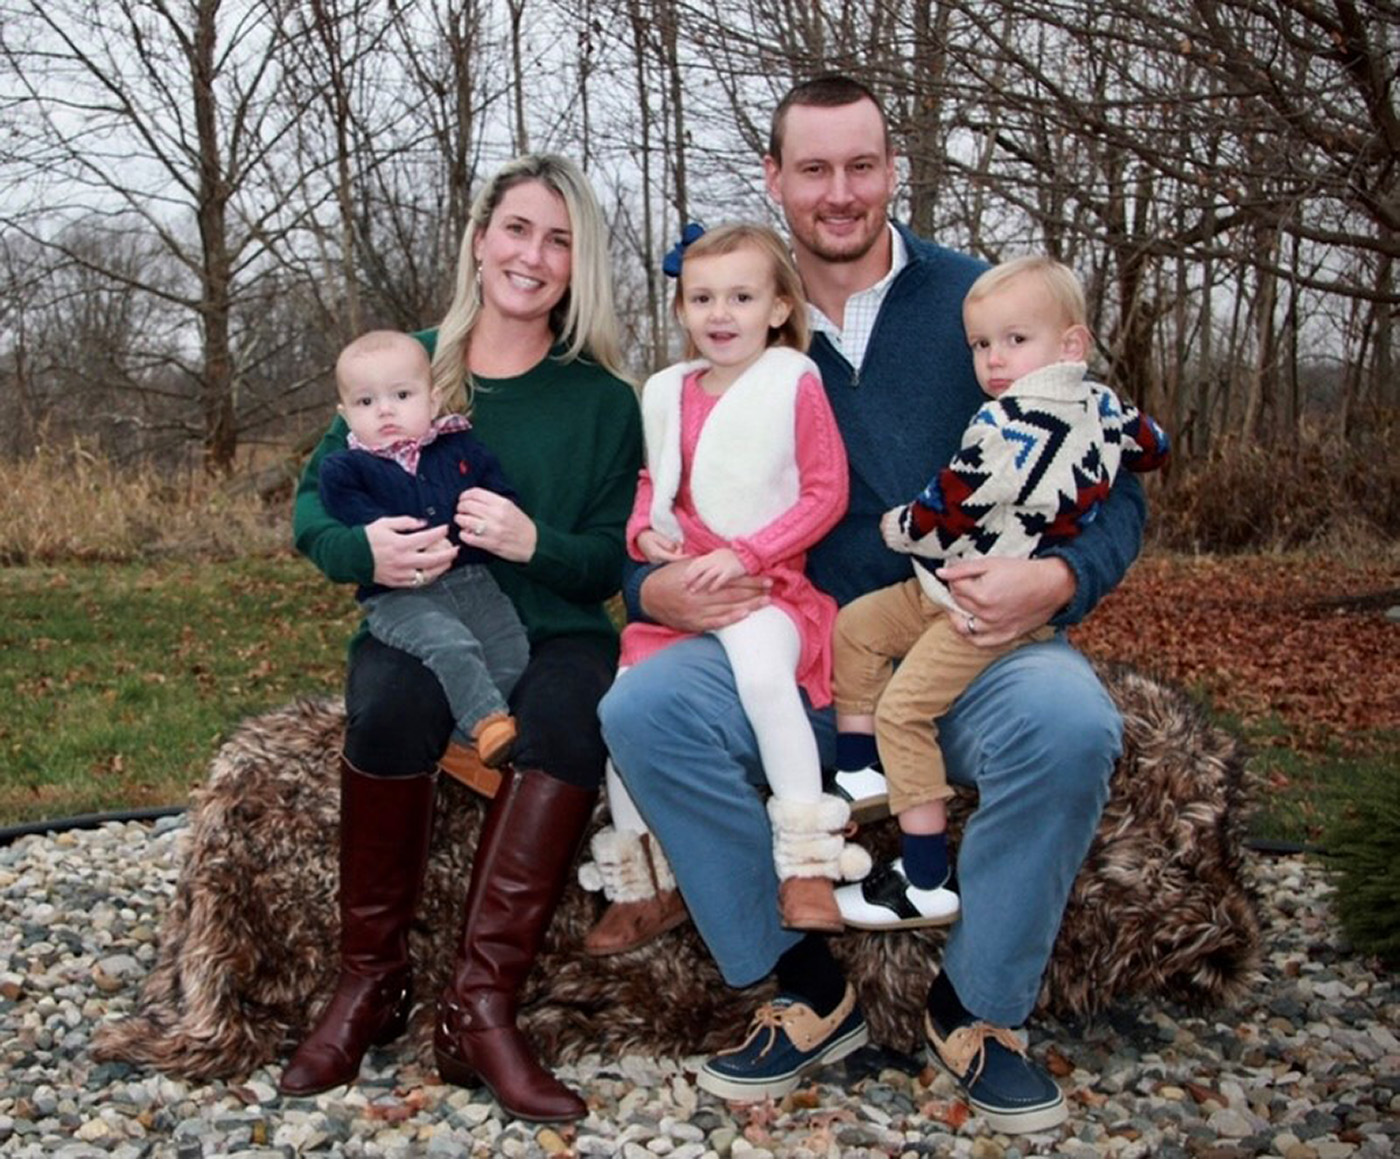 PHOTO: Kristyn Watkins, of Indiana, poses with her husband and three children.